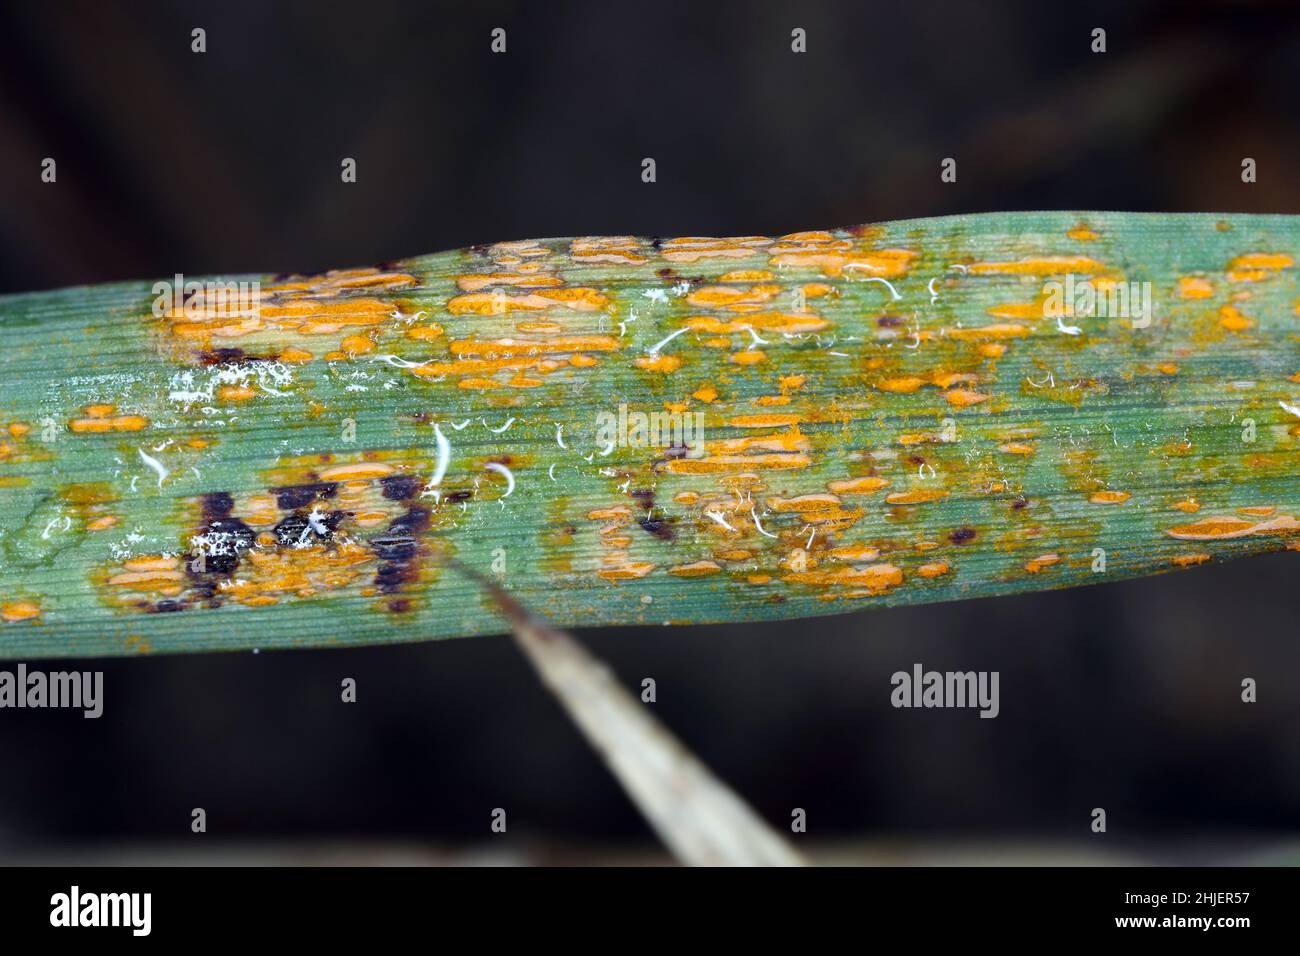 Symptoms of a plant pathogen and causal agent of oat and barley crown rust - Puccinia coronata on oat leaves - Telium, plural telia. Stock Photo